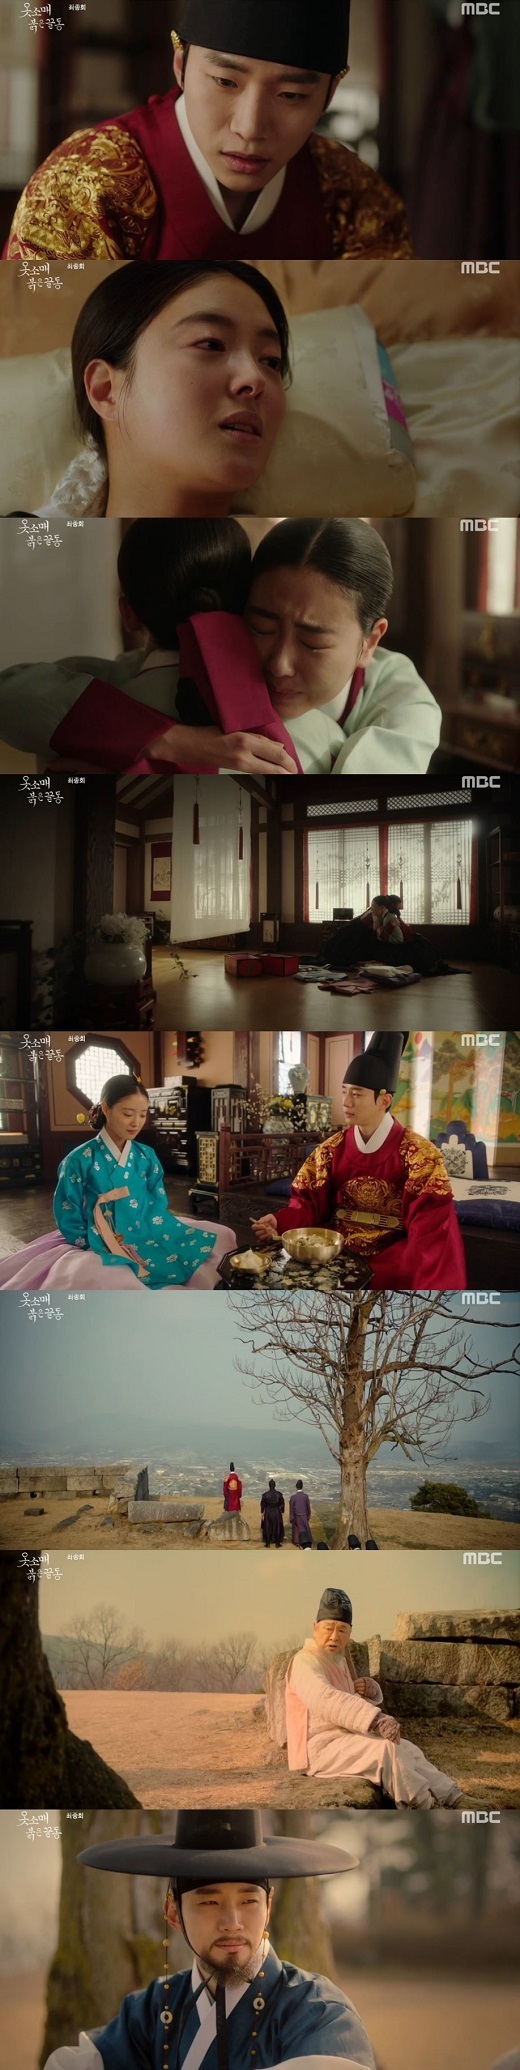 Lee Joon-ho and Lee Se-young had a heartbreaking farewell.The last episode of MBCs gilt Drama Red End of Clothes Retail (playplayplay by Jeong Hae-ri, director Song Yeon-hwa) was broadcast on the 1st night.Moonhyo, the first son of Jeongjo Yisan (Lee Joon-ho) and Uibin Sung (Lee Se-young), died at a young age after suffering from measles. Jeongjo told his servant, I put my child ahead as a father.The sadness can not be said, but the child of the widow is not one of the taxa.All of the people of Joseon are the children of the widows. He no longer wastes time with sadness and ordered all the people to be saved from plague.The re-elected Uibin broke even the curvature of his sons death and shed tears without hesitation, and Jeongjo raised his voice to wake up, saying that he should do his best as a genuine first-class bin.Euibin, who was energized to protect his life in the ship, brought his longtime comrades Kyunghee (Hayul-ri) and Bokyeon (Lee Min-ji) to his place of residence.Later, Ahn, who was told that Young-hee (Lee Eun-sam) was secretly trapped in a house after secretly infringing and miscarriing her child, headed to Young-hee directly late at night.Younghee said to Ubin, I knew everyone was sad, but I just wanted to live as I wanted. I tasted happiness that I could not dream as a lady.I do not care if the price is death. The body and the mind were exhausted and the weakened person was sick again.While Jeongjo was away for a while, Seo Sang-gung (Jang Hye-jin) kept Uibins position, and Uibin searched for Kyung-hee and Bok-yeon as his condition deteriorated.If you look at the next life, please pass by the collar as if you do not know it, said Jeongjo, who returned. In the next life, I want to live as I want.Jungjo hugged Ubin and said, Do not leave me.Although Subin Park, the concubine of the house, came to the court, Jeongjo, who had not forgotten the court, did not give his heart to the concubine.Jungjo, who had been living with the time, recalled the past at the place where the guest stayed ahead of the date.Kyung Hee, who became a manufacturing palace, handed the remains of Uibin to Jeongjo and told him instead of the truth left by Uibin.The remains were the reflections, books, and courtesans that Jeongjo ordered to the queen. Jeongjo said, I was a small person. I was the one who loved you.